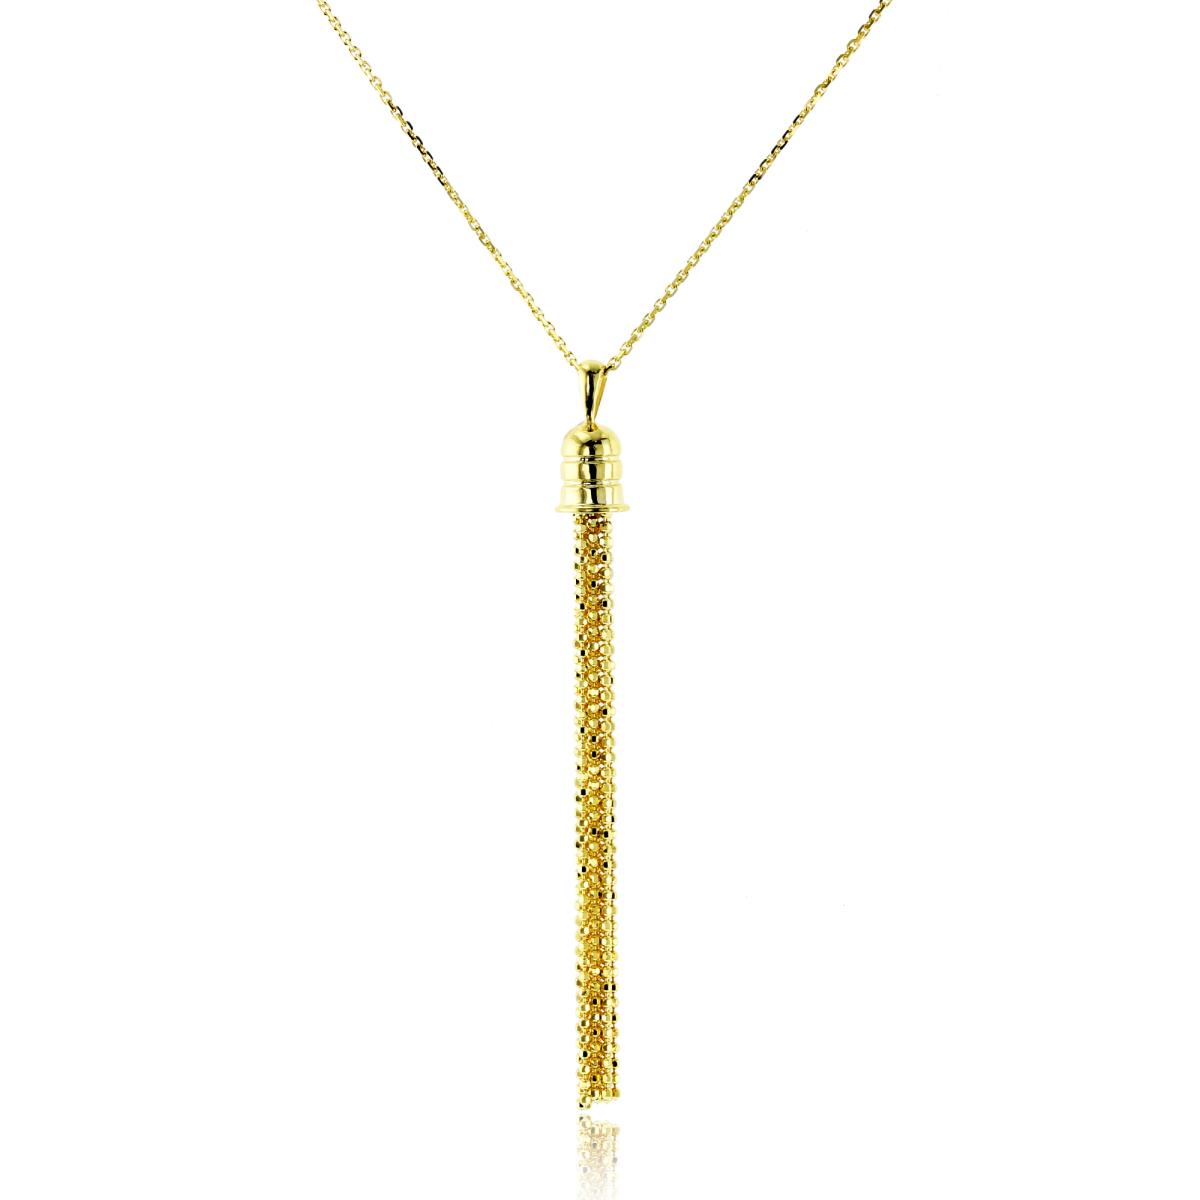 10K Yellow Gold Beaded Tassle 18" Necklace